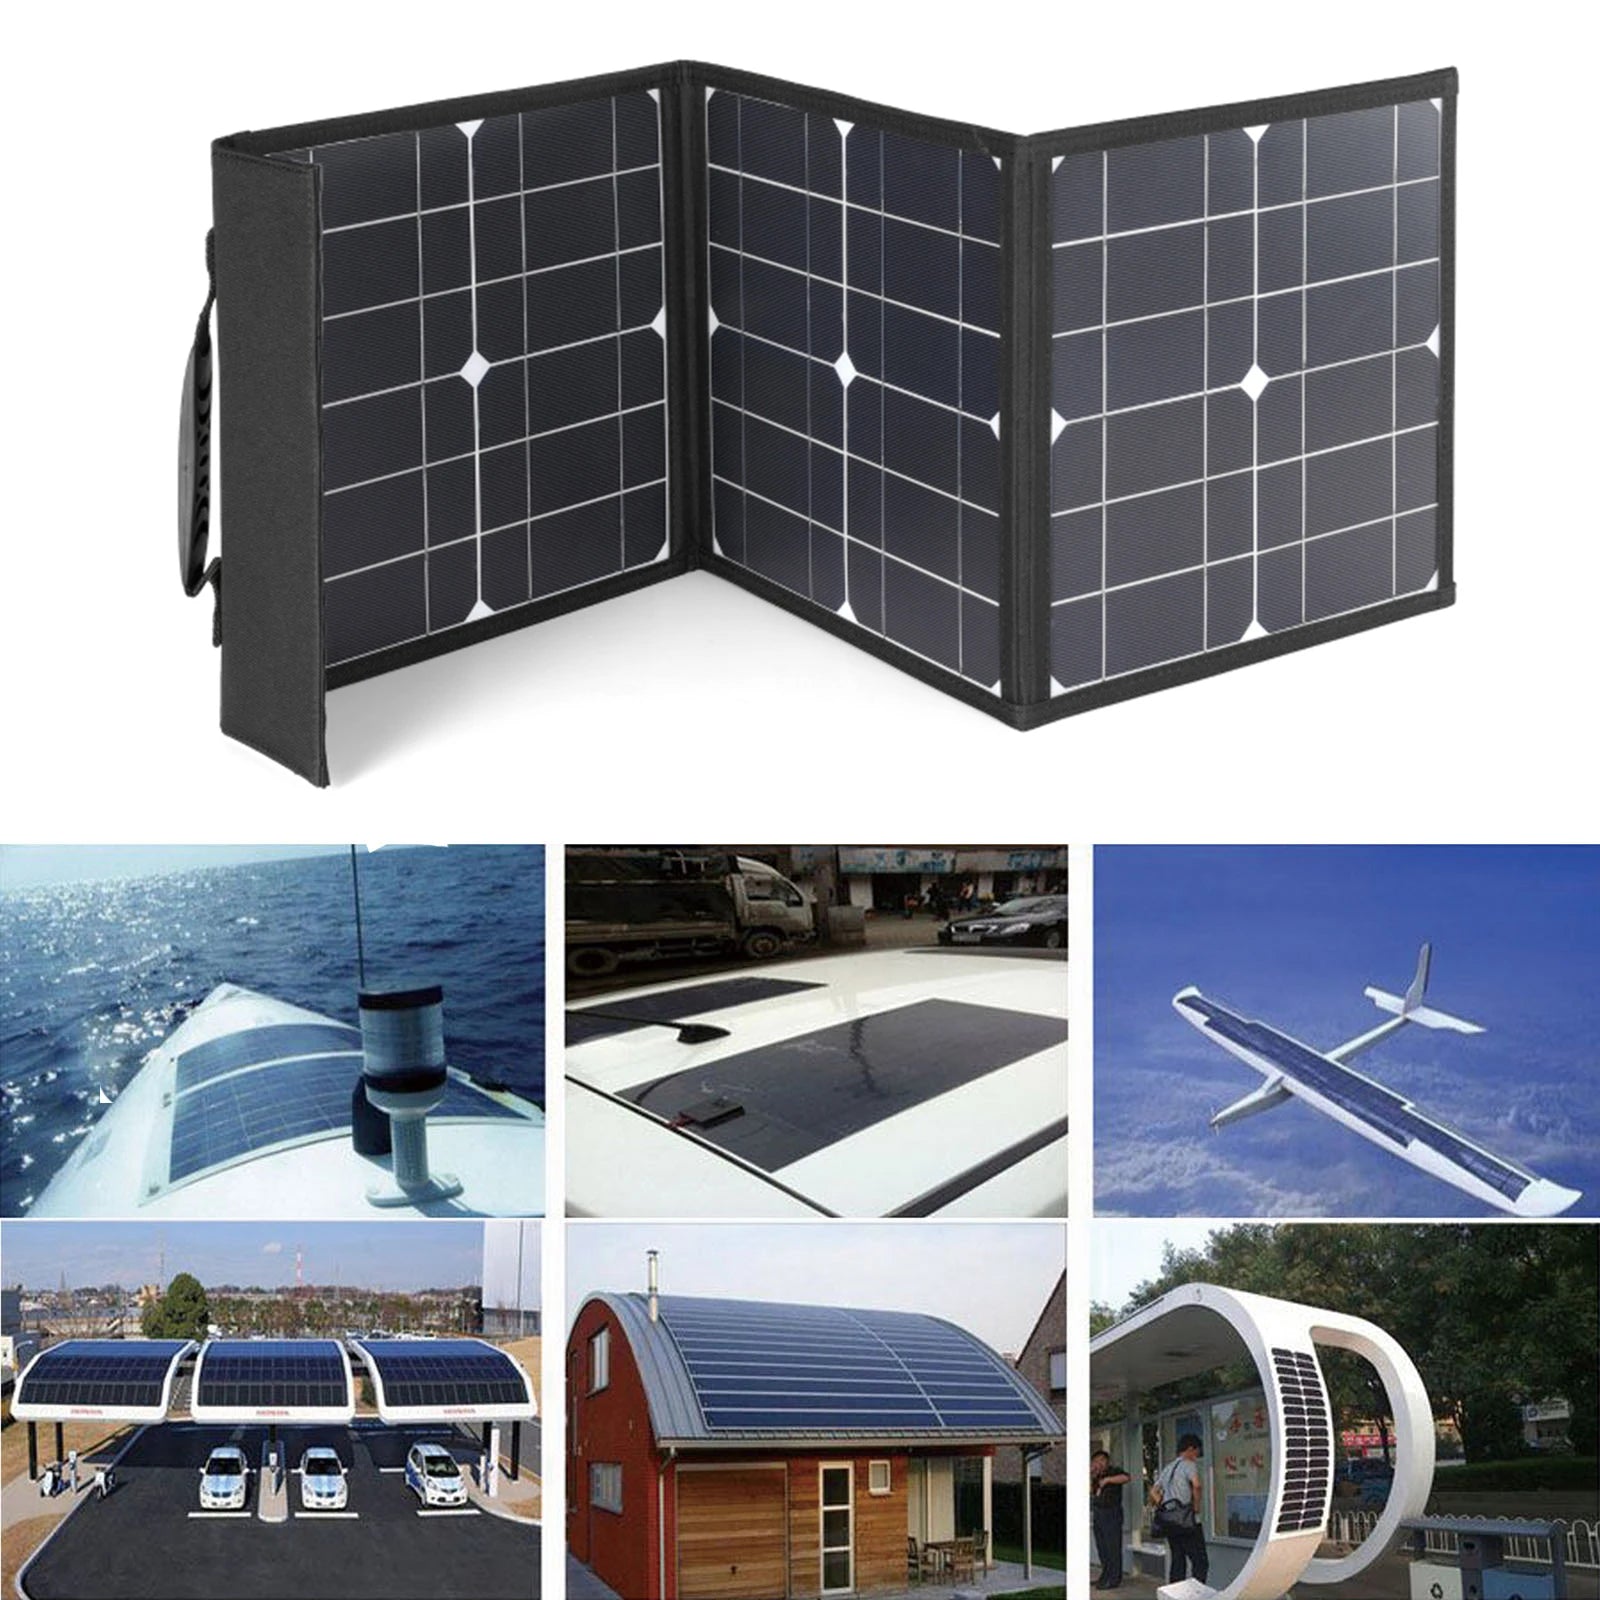 Features high-efficiency monocrystalline silicon solar cells and durable PET packaging for maximum power output.